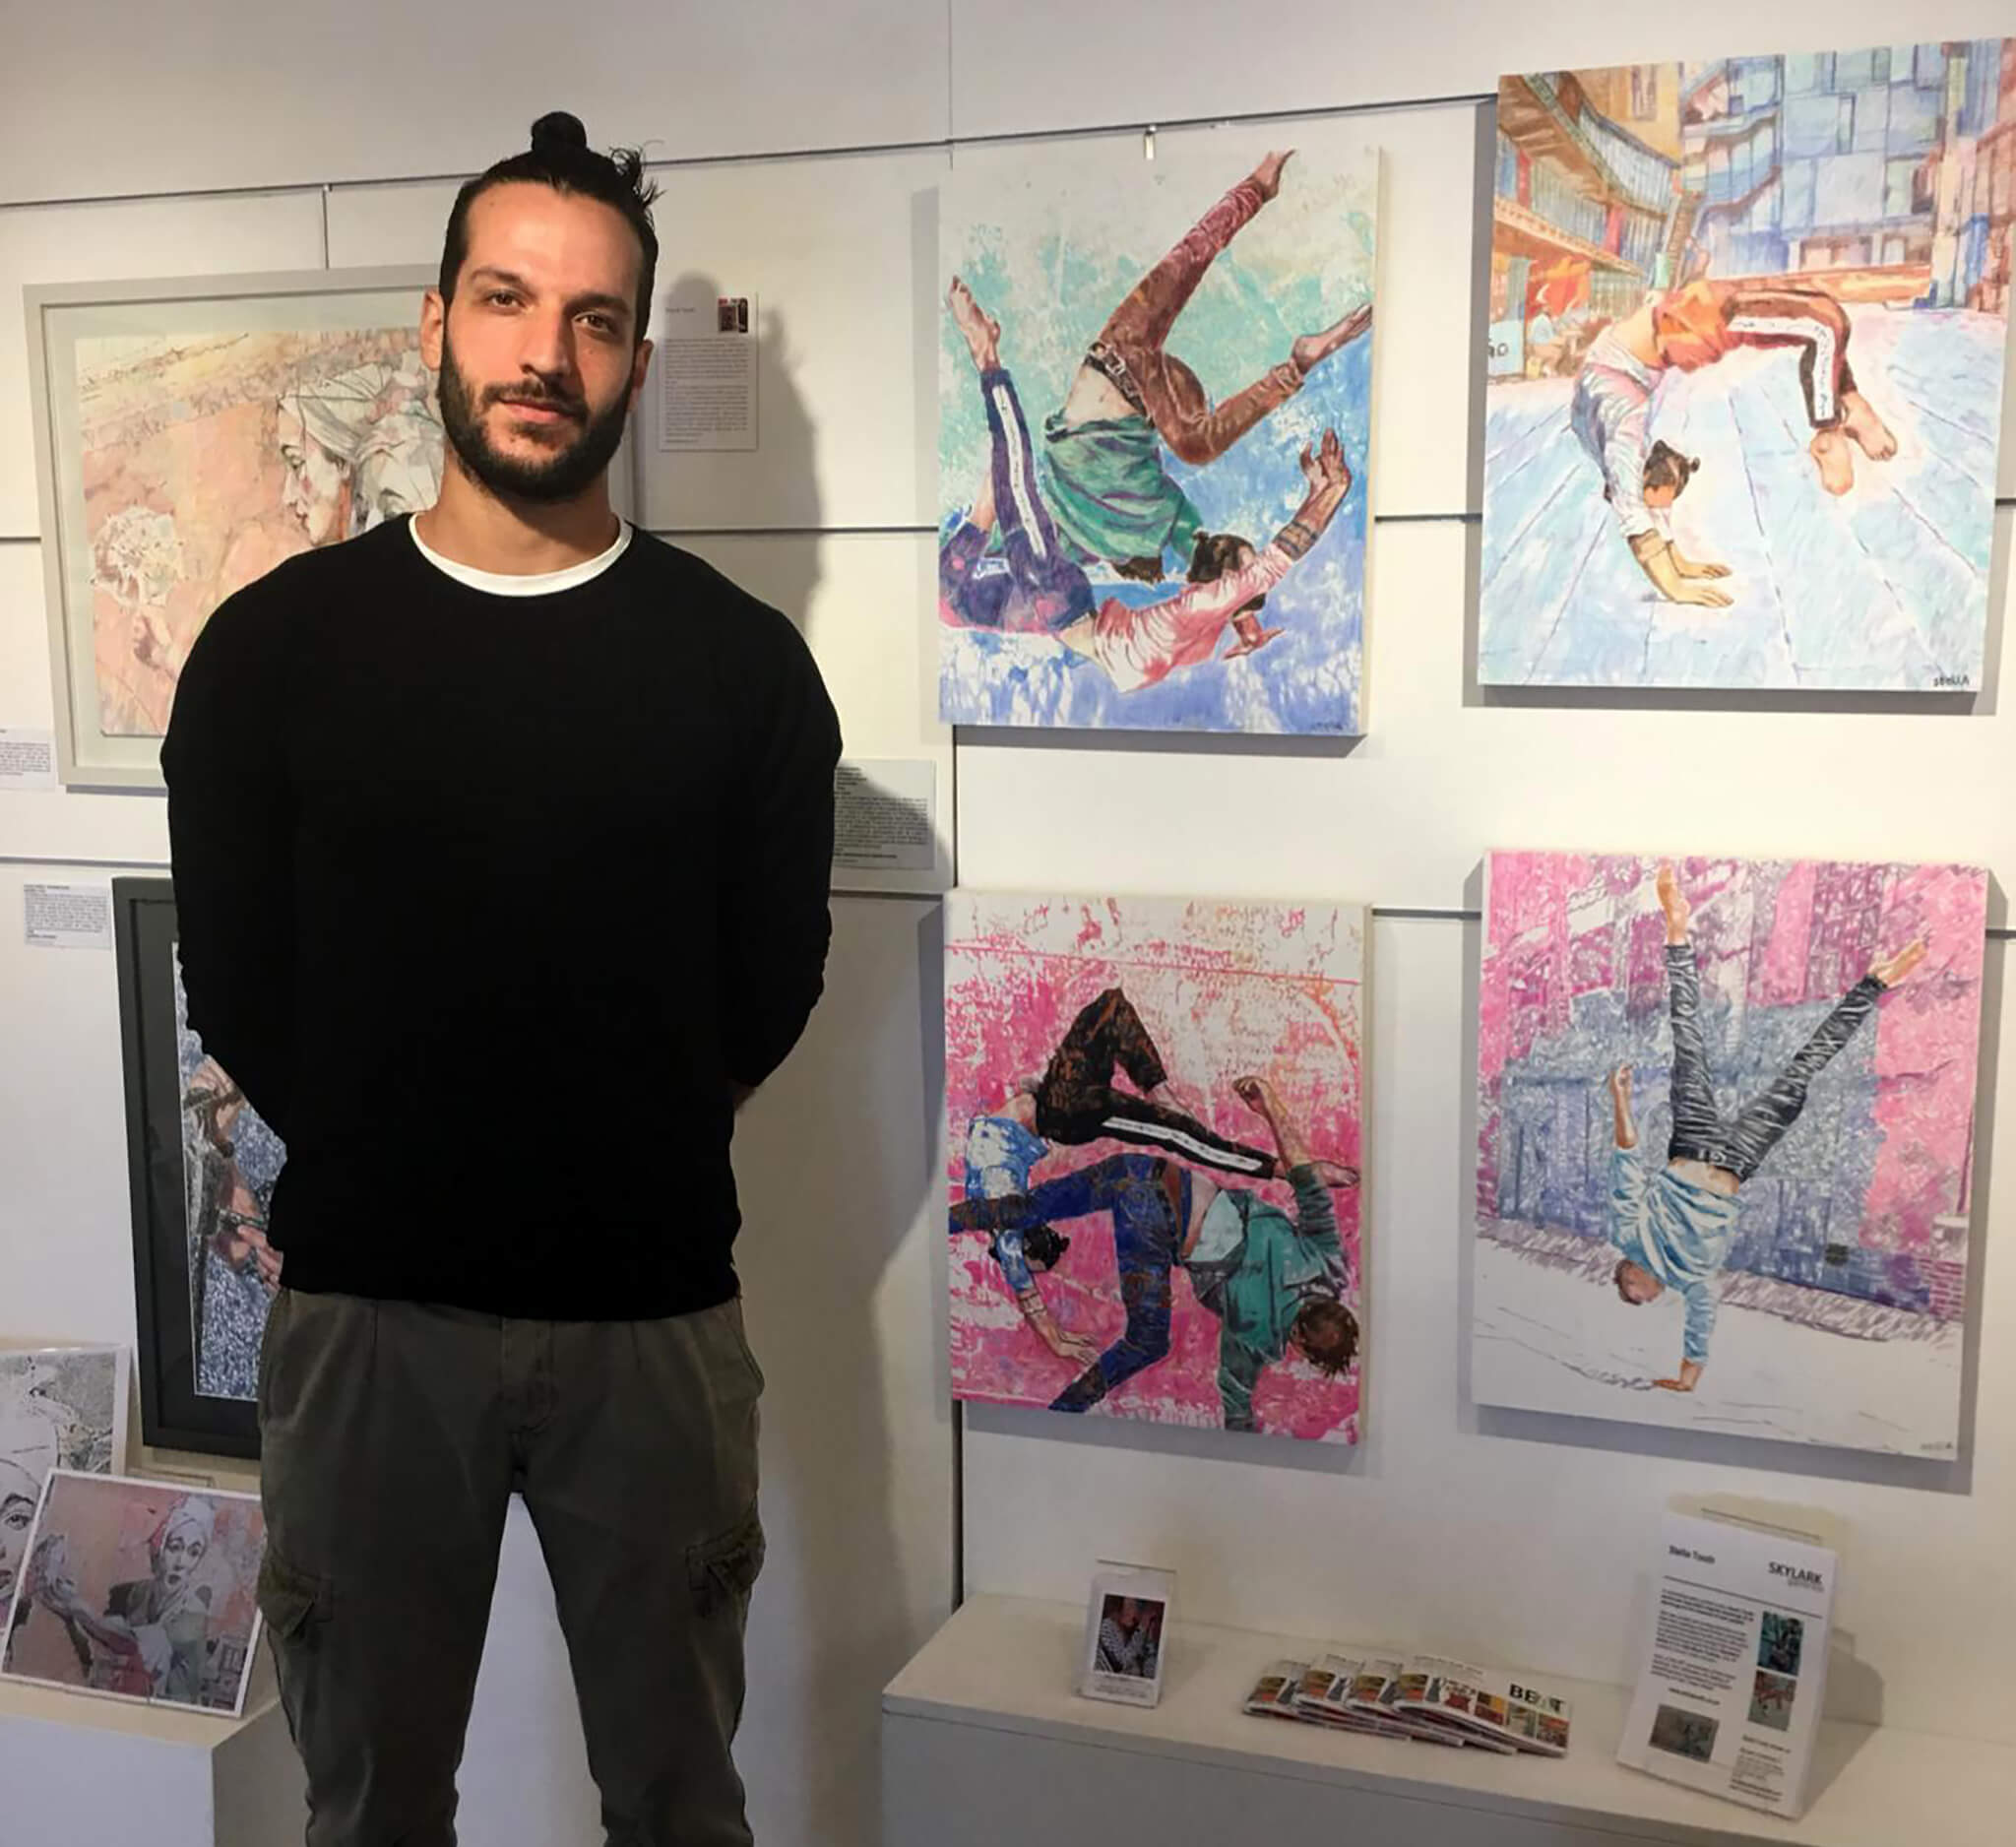 Acrobat Manuele d'Aquino at Skylark Galleries with Stella Tooth's pencil on cradled gesso panel portrait of him.